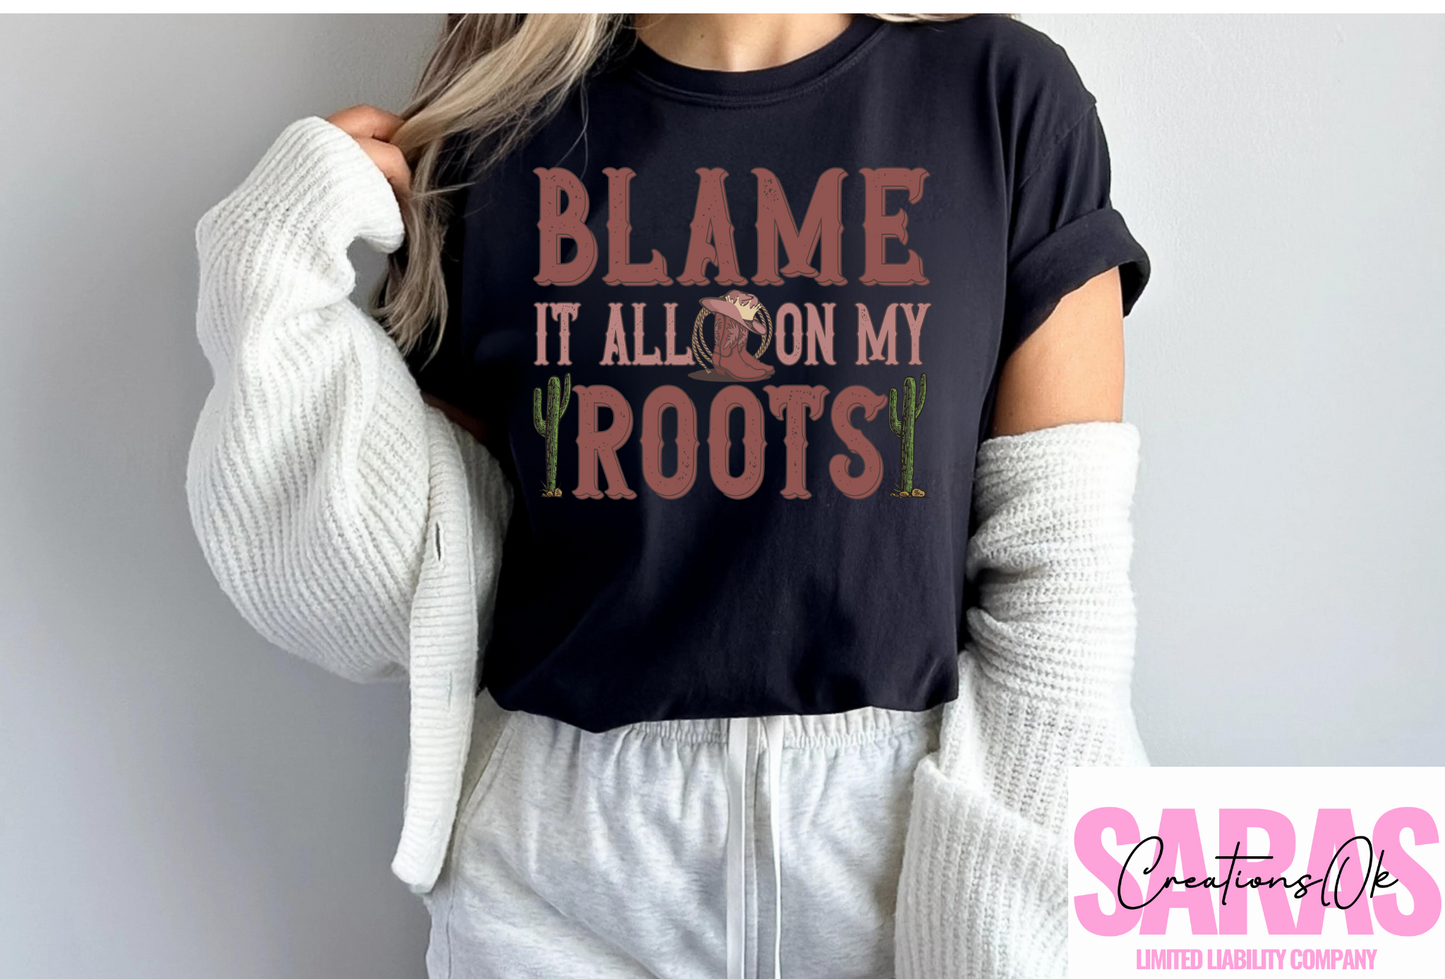 Blame It All On My Roots Adult Shirt